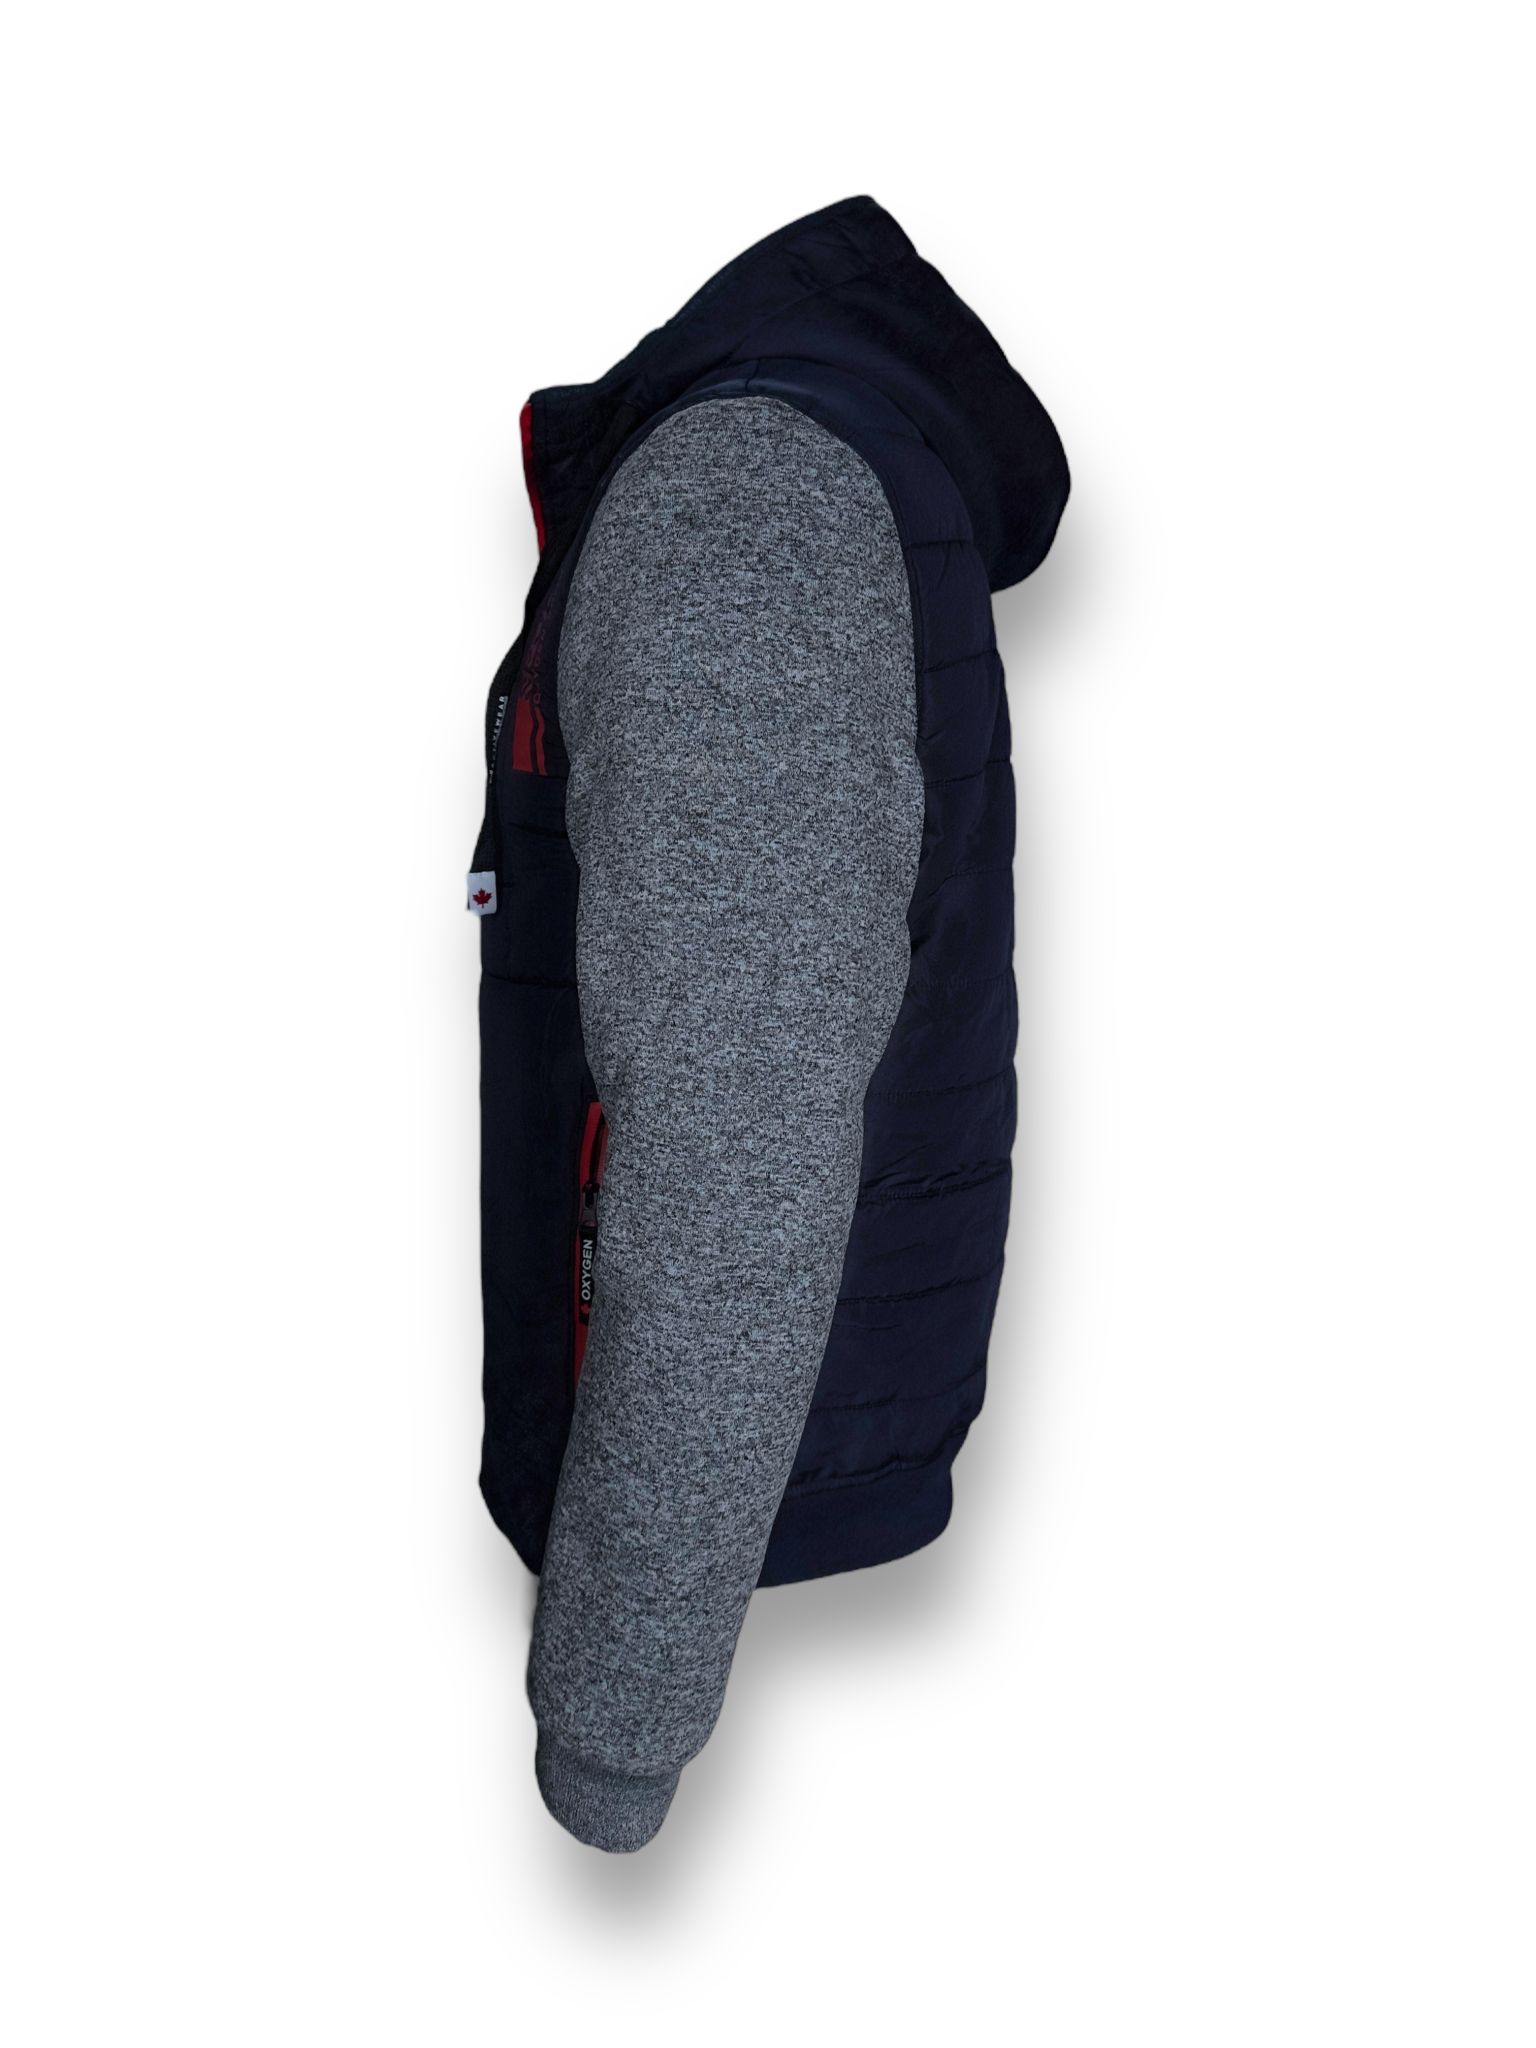 MS100-443 NAVY HOODY WITH CORD